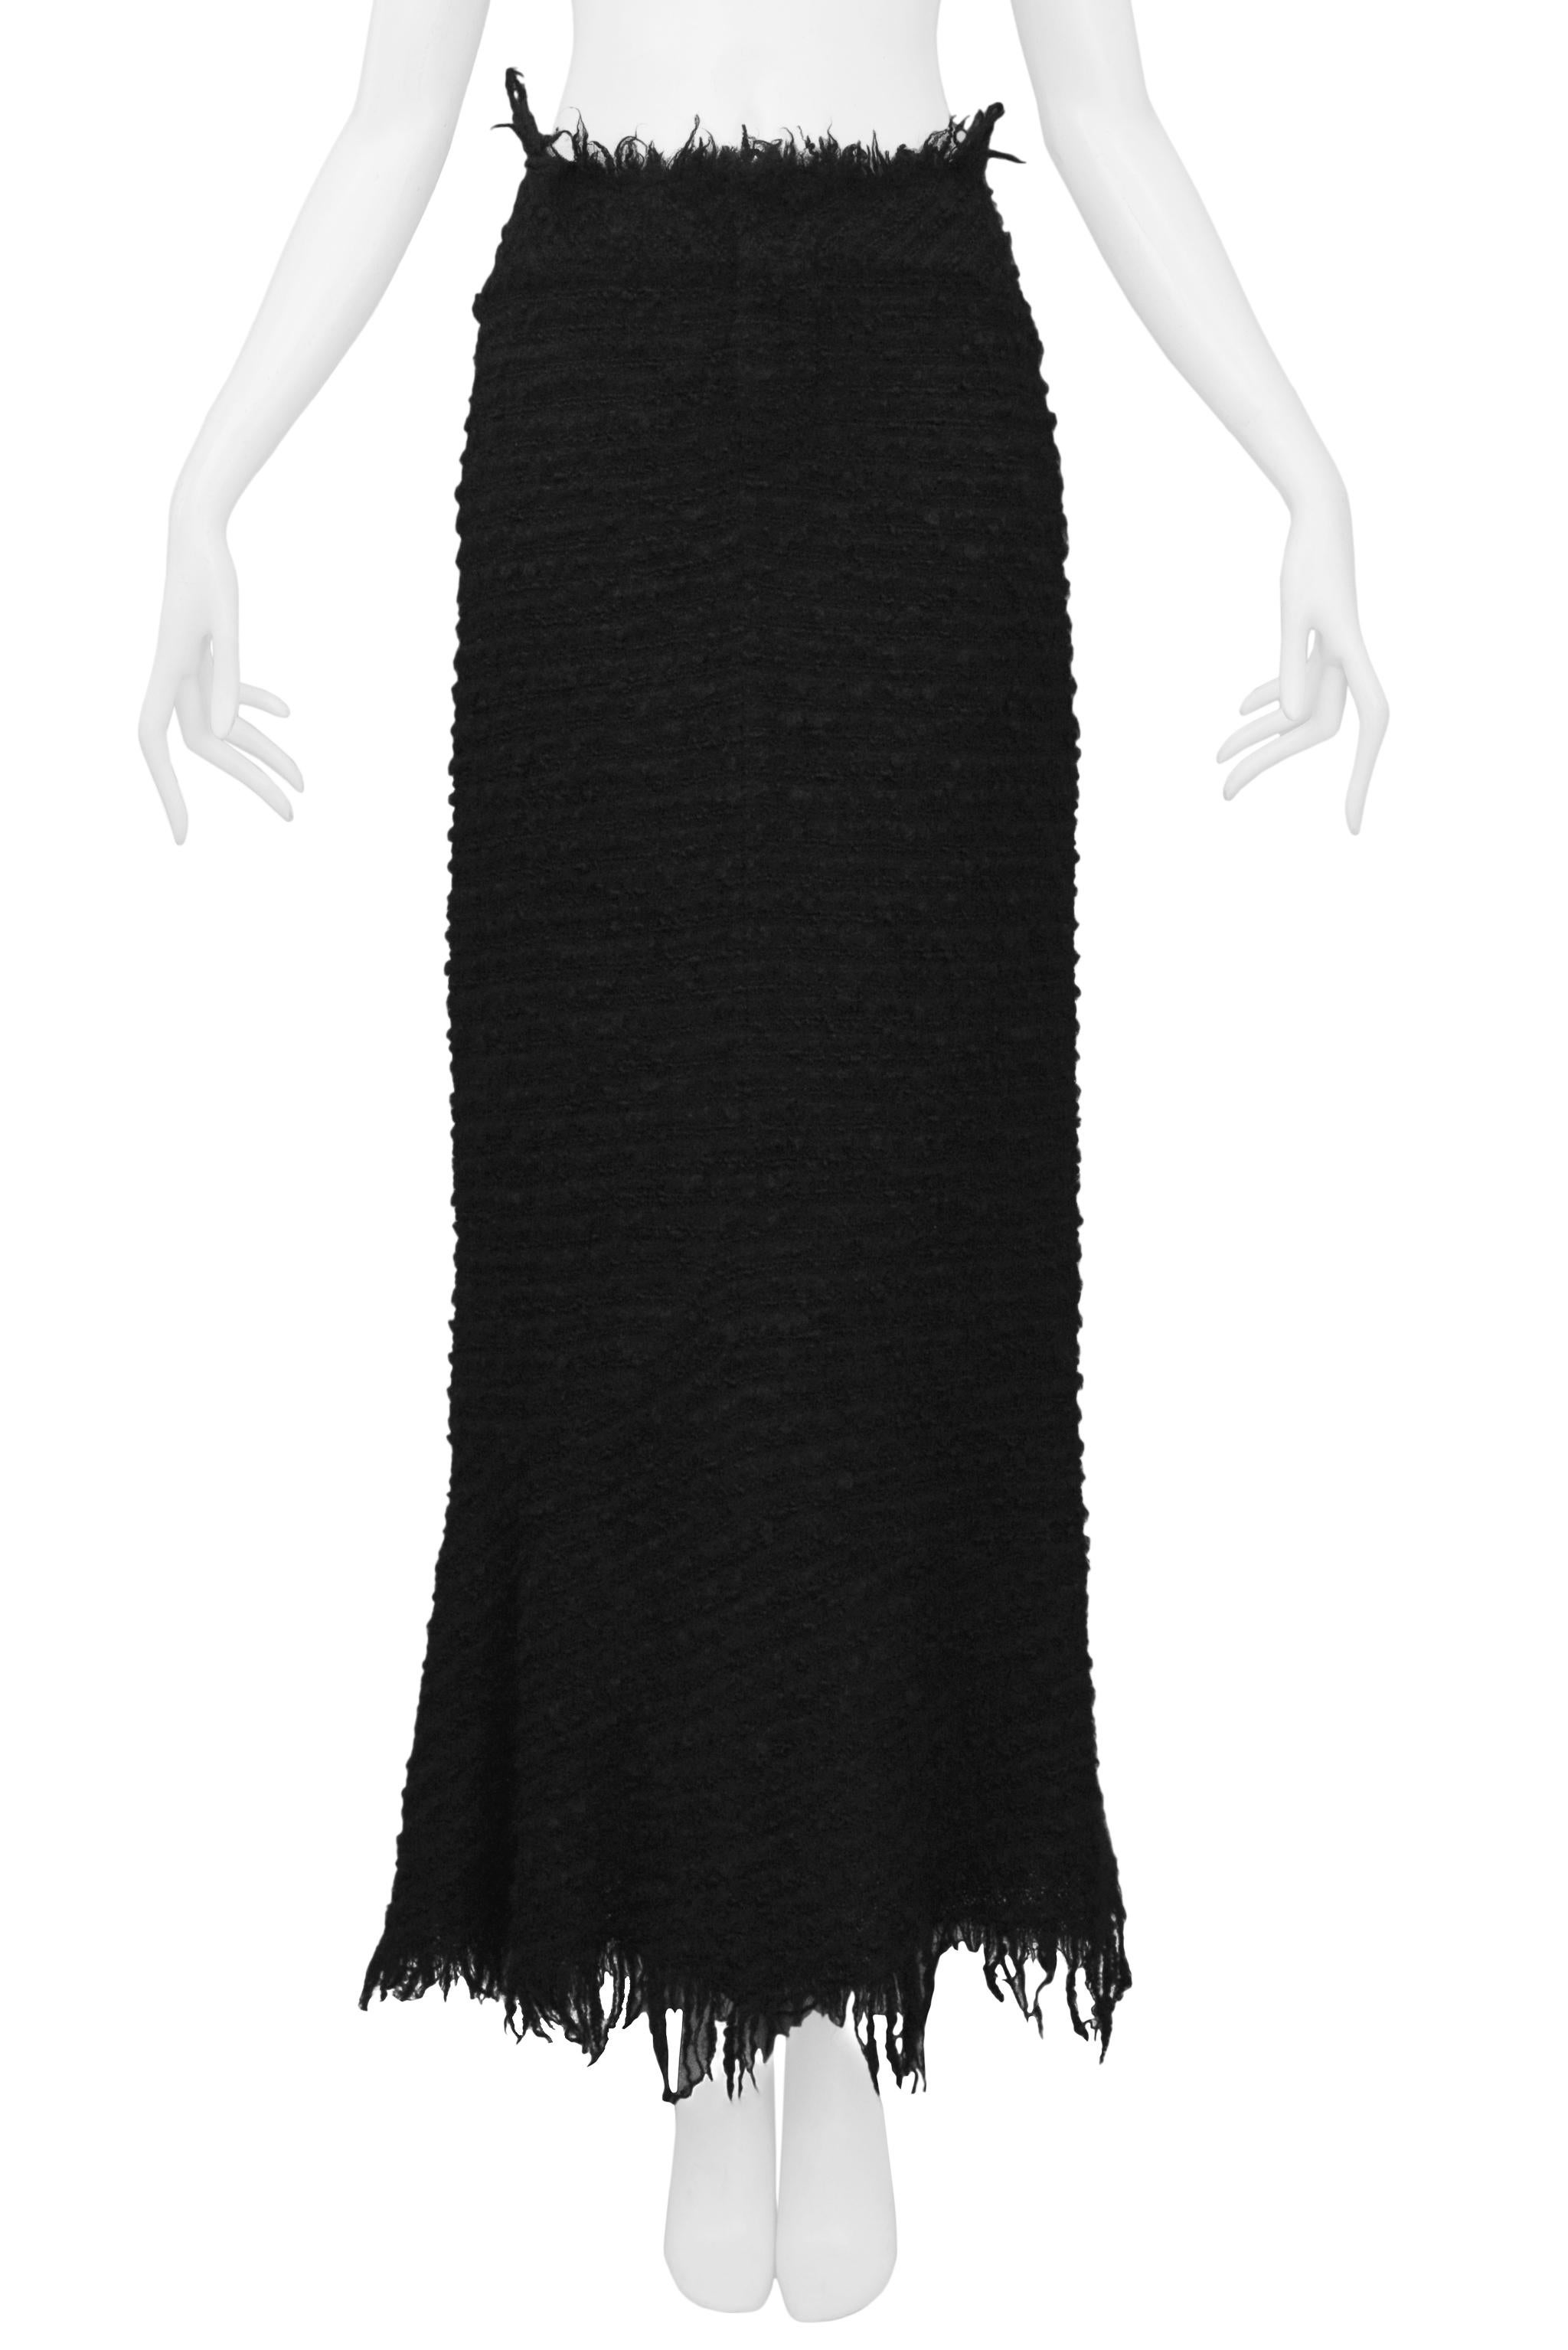 Junya Watanabe Black Boucle Maxi Skirt With Raw Edges In Excellent Condition For Sale In Los Angeles, CA